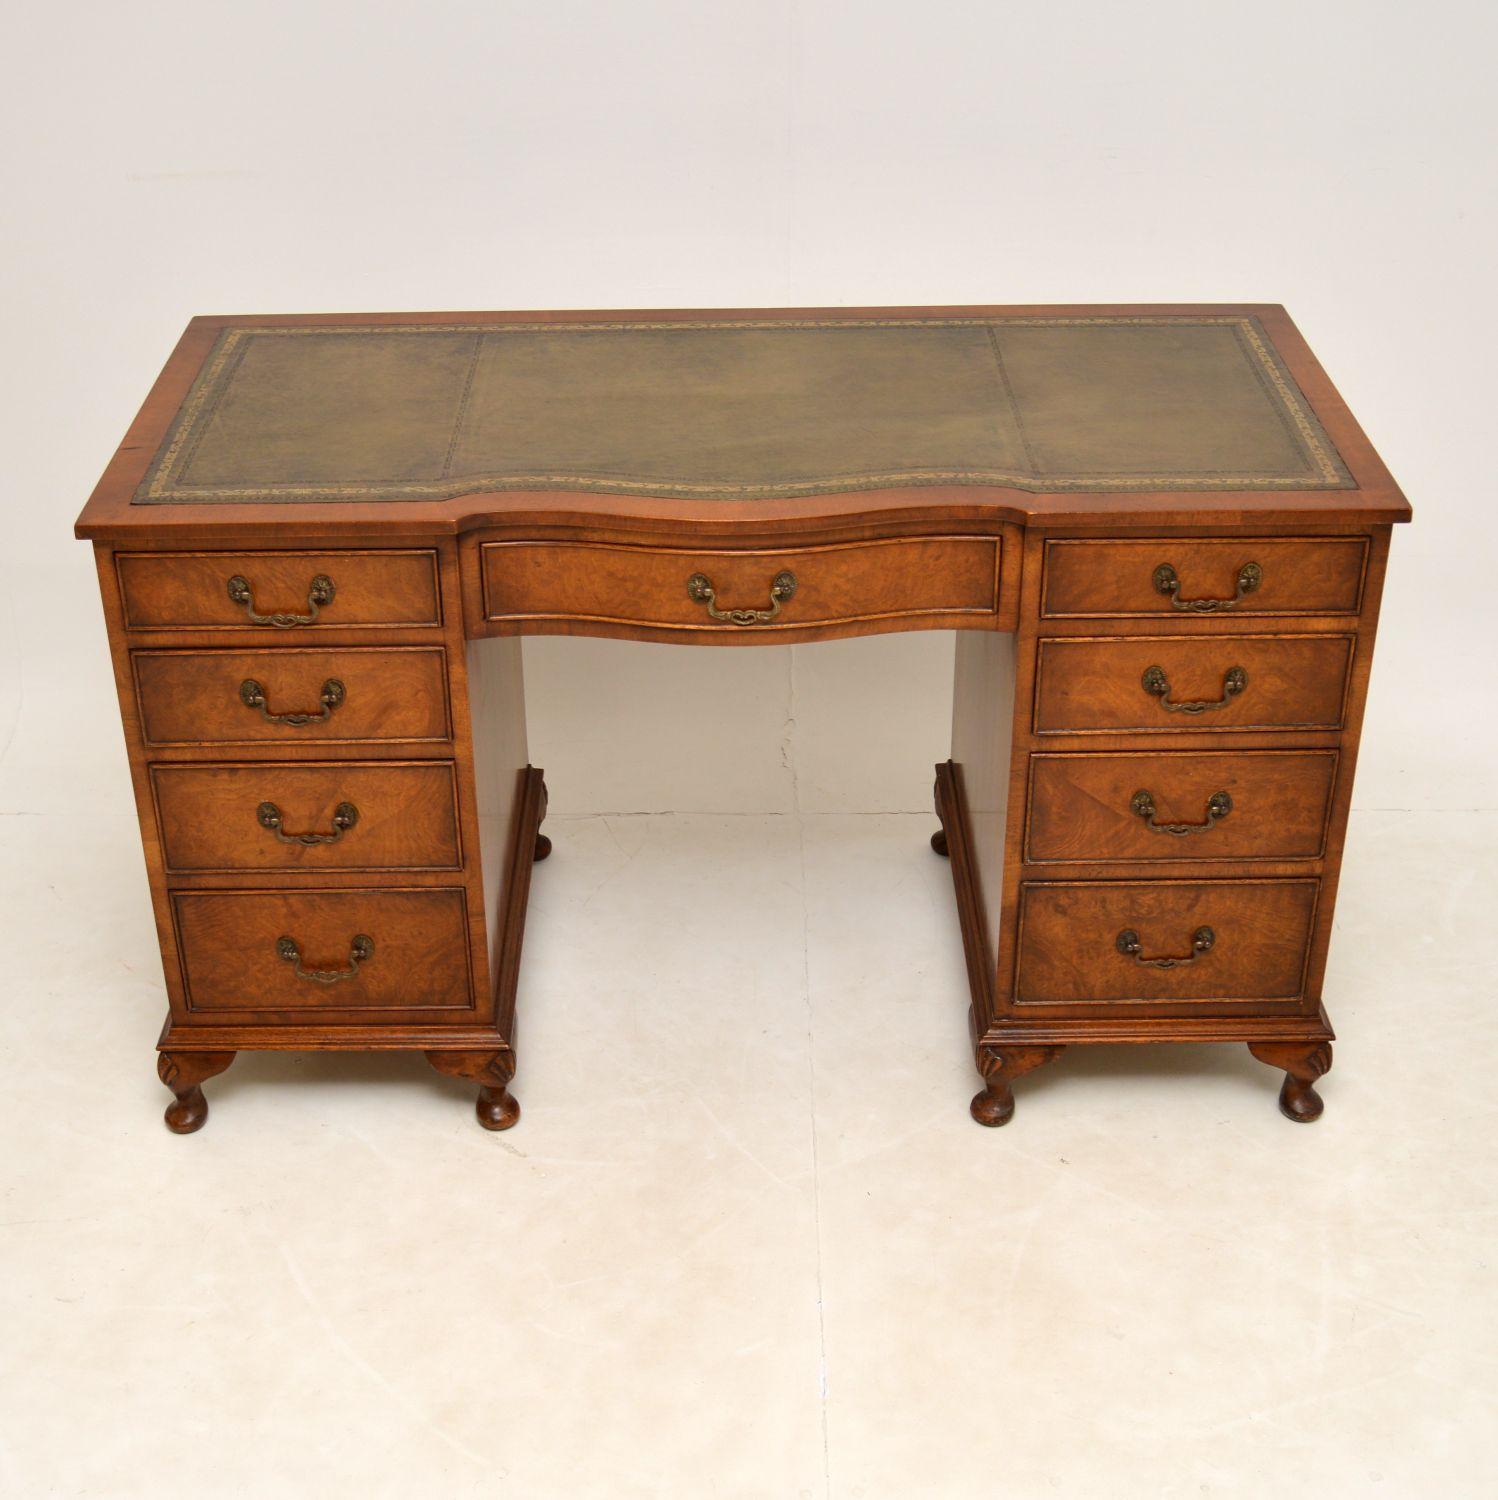 An excellent antique burr walnut desk with a leather writing surface & dating from around the 1930’s period.

It has a serpentine shaped front & the drawers are graduated in depth with original brass handles. The burr walnut side panels are